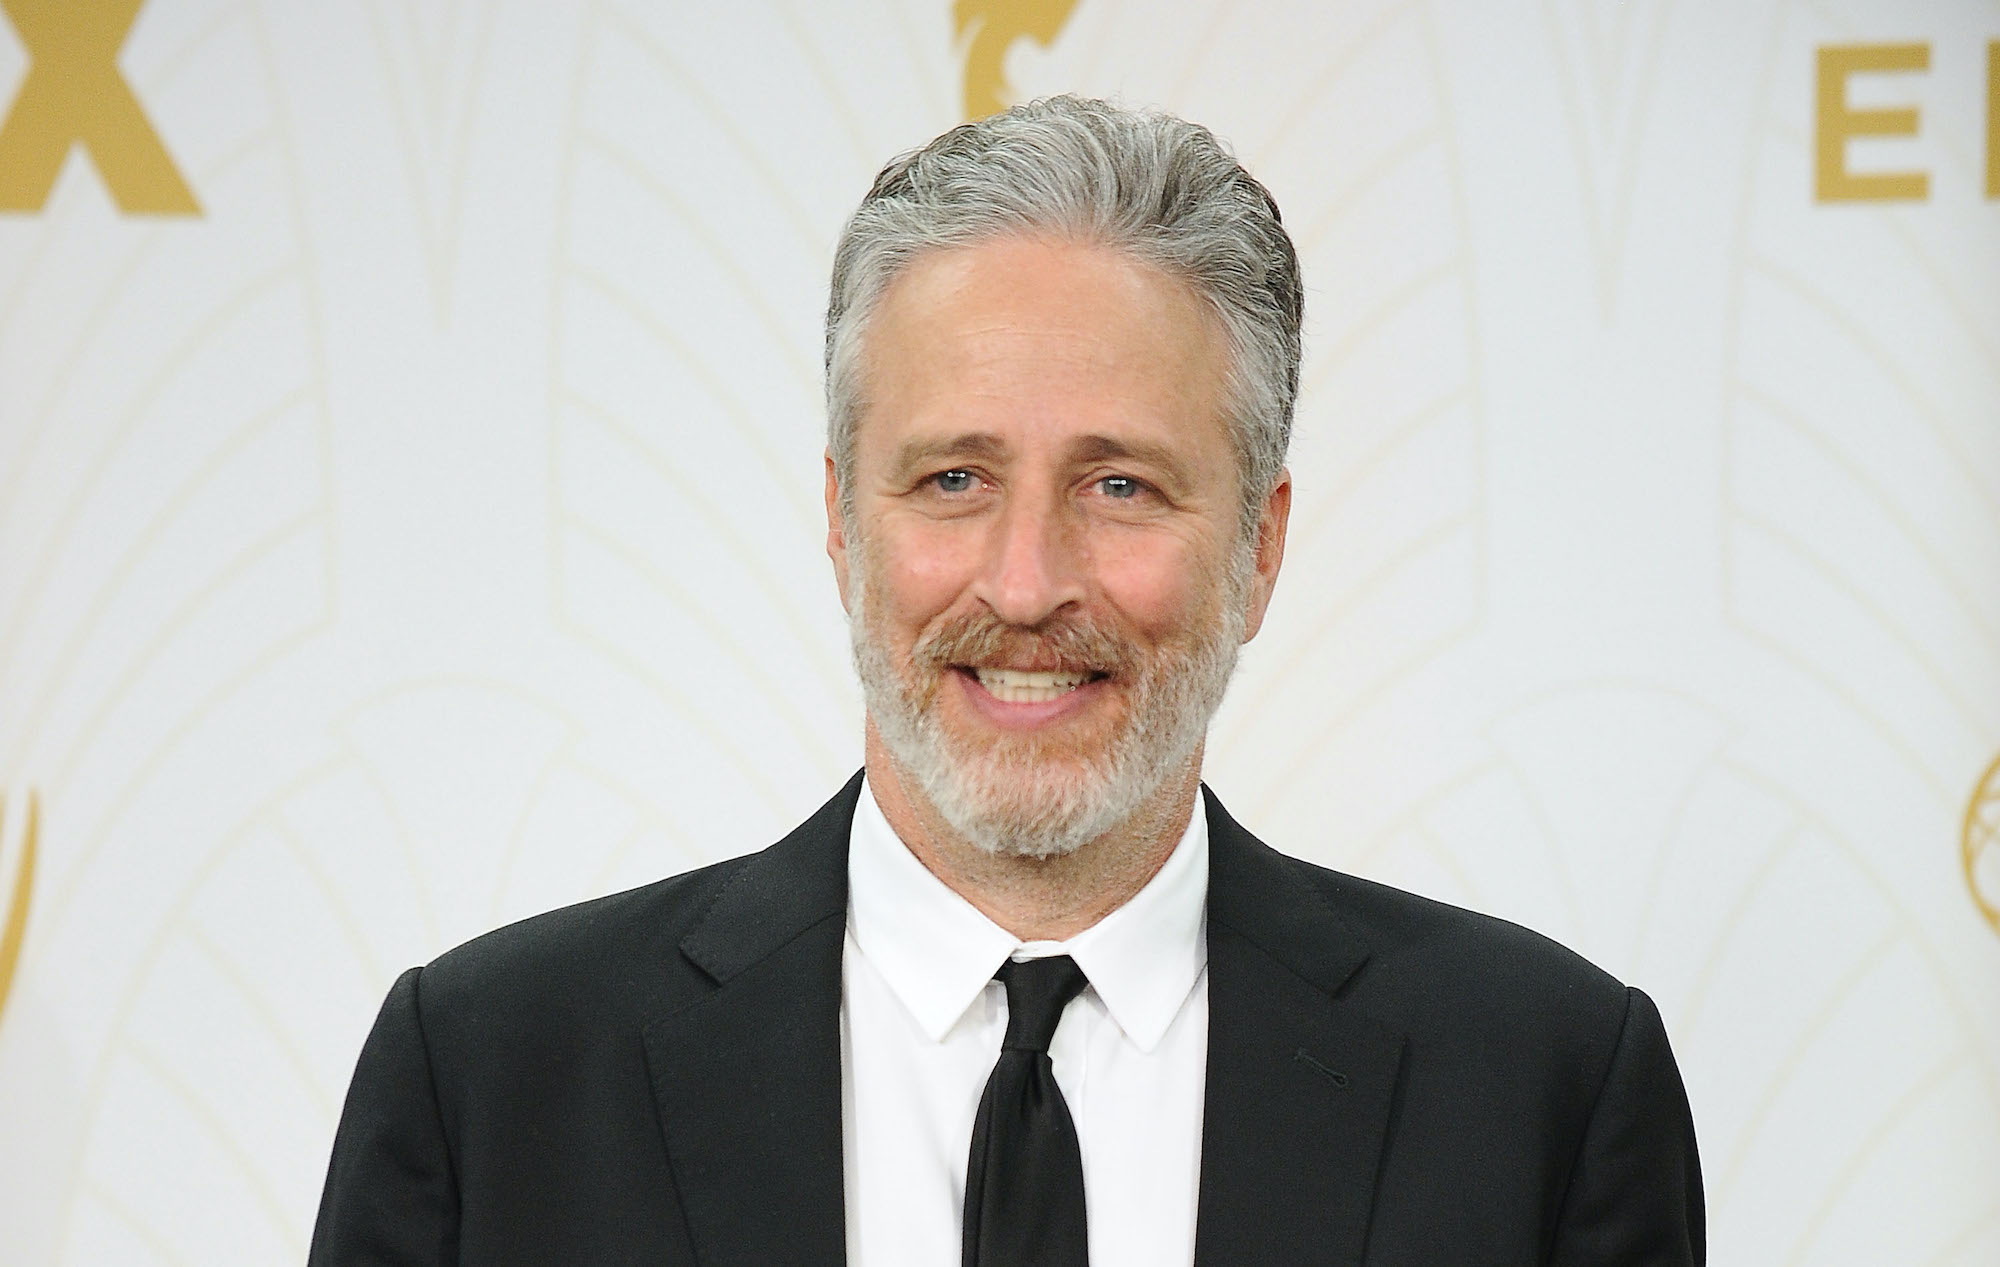 Jon Stewart smiling in front of a white background